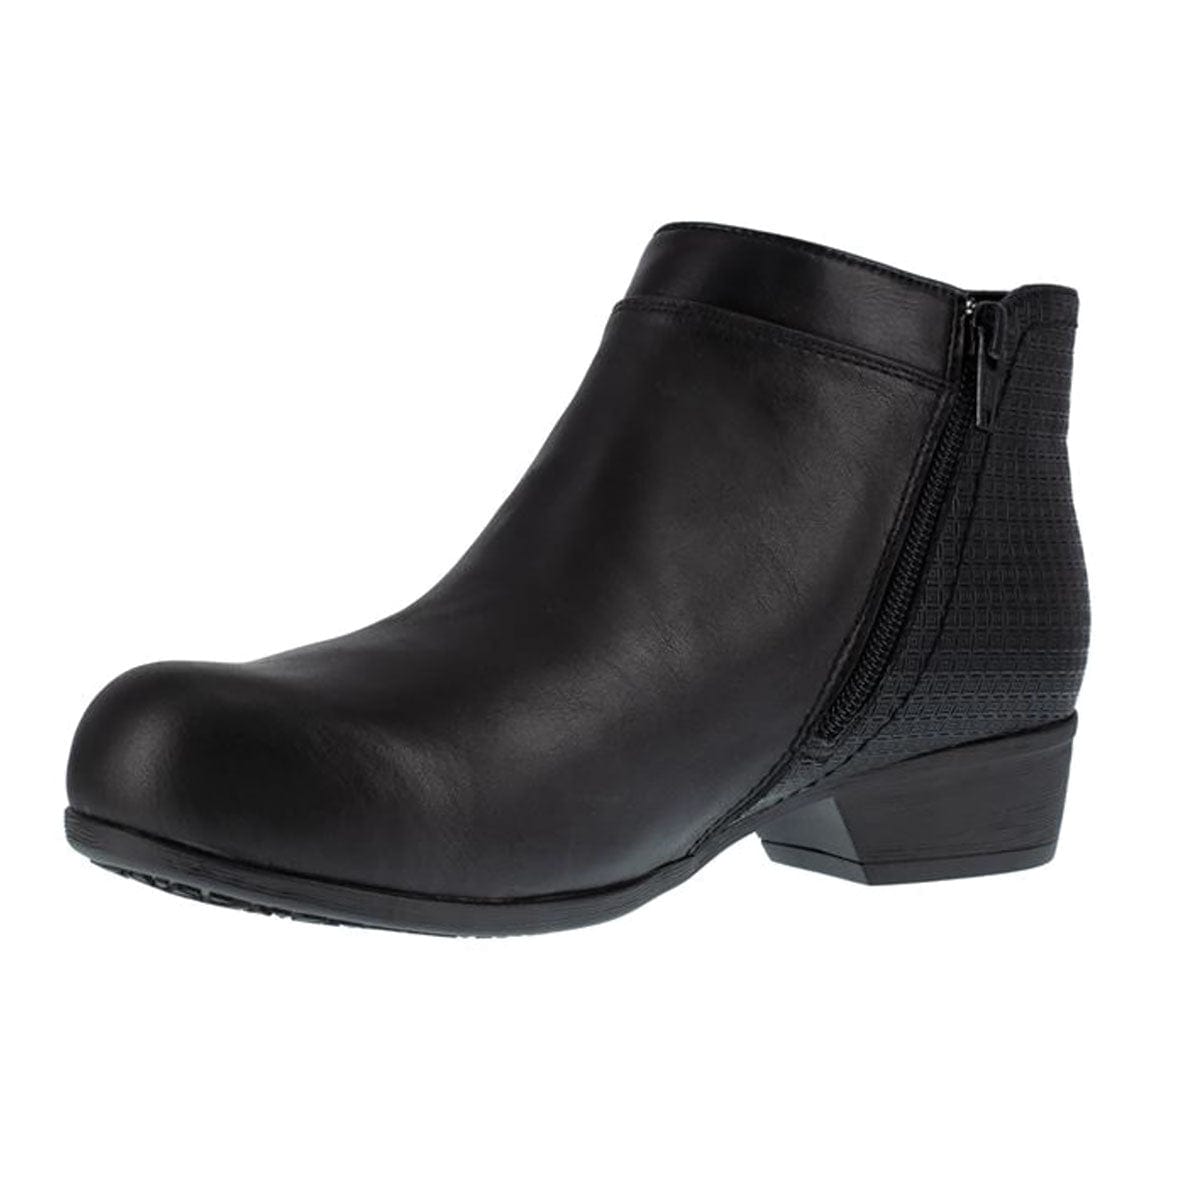 Rockport Works RK751 Women's Carly Alloy Toe Booties | Gempler's